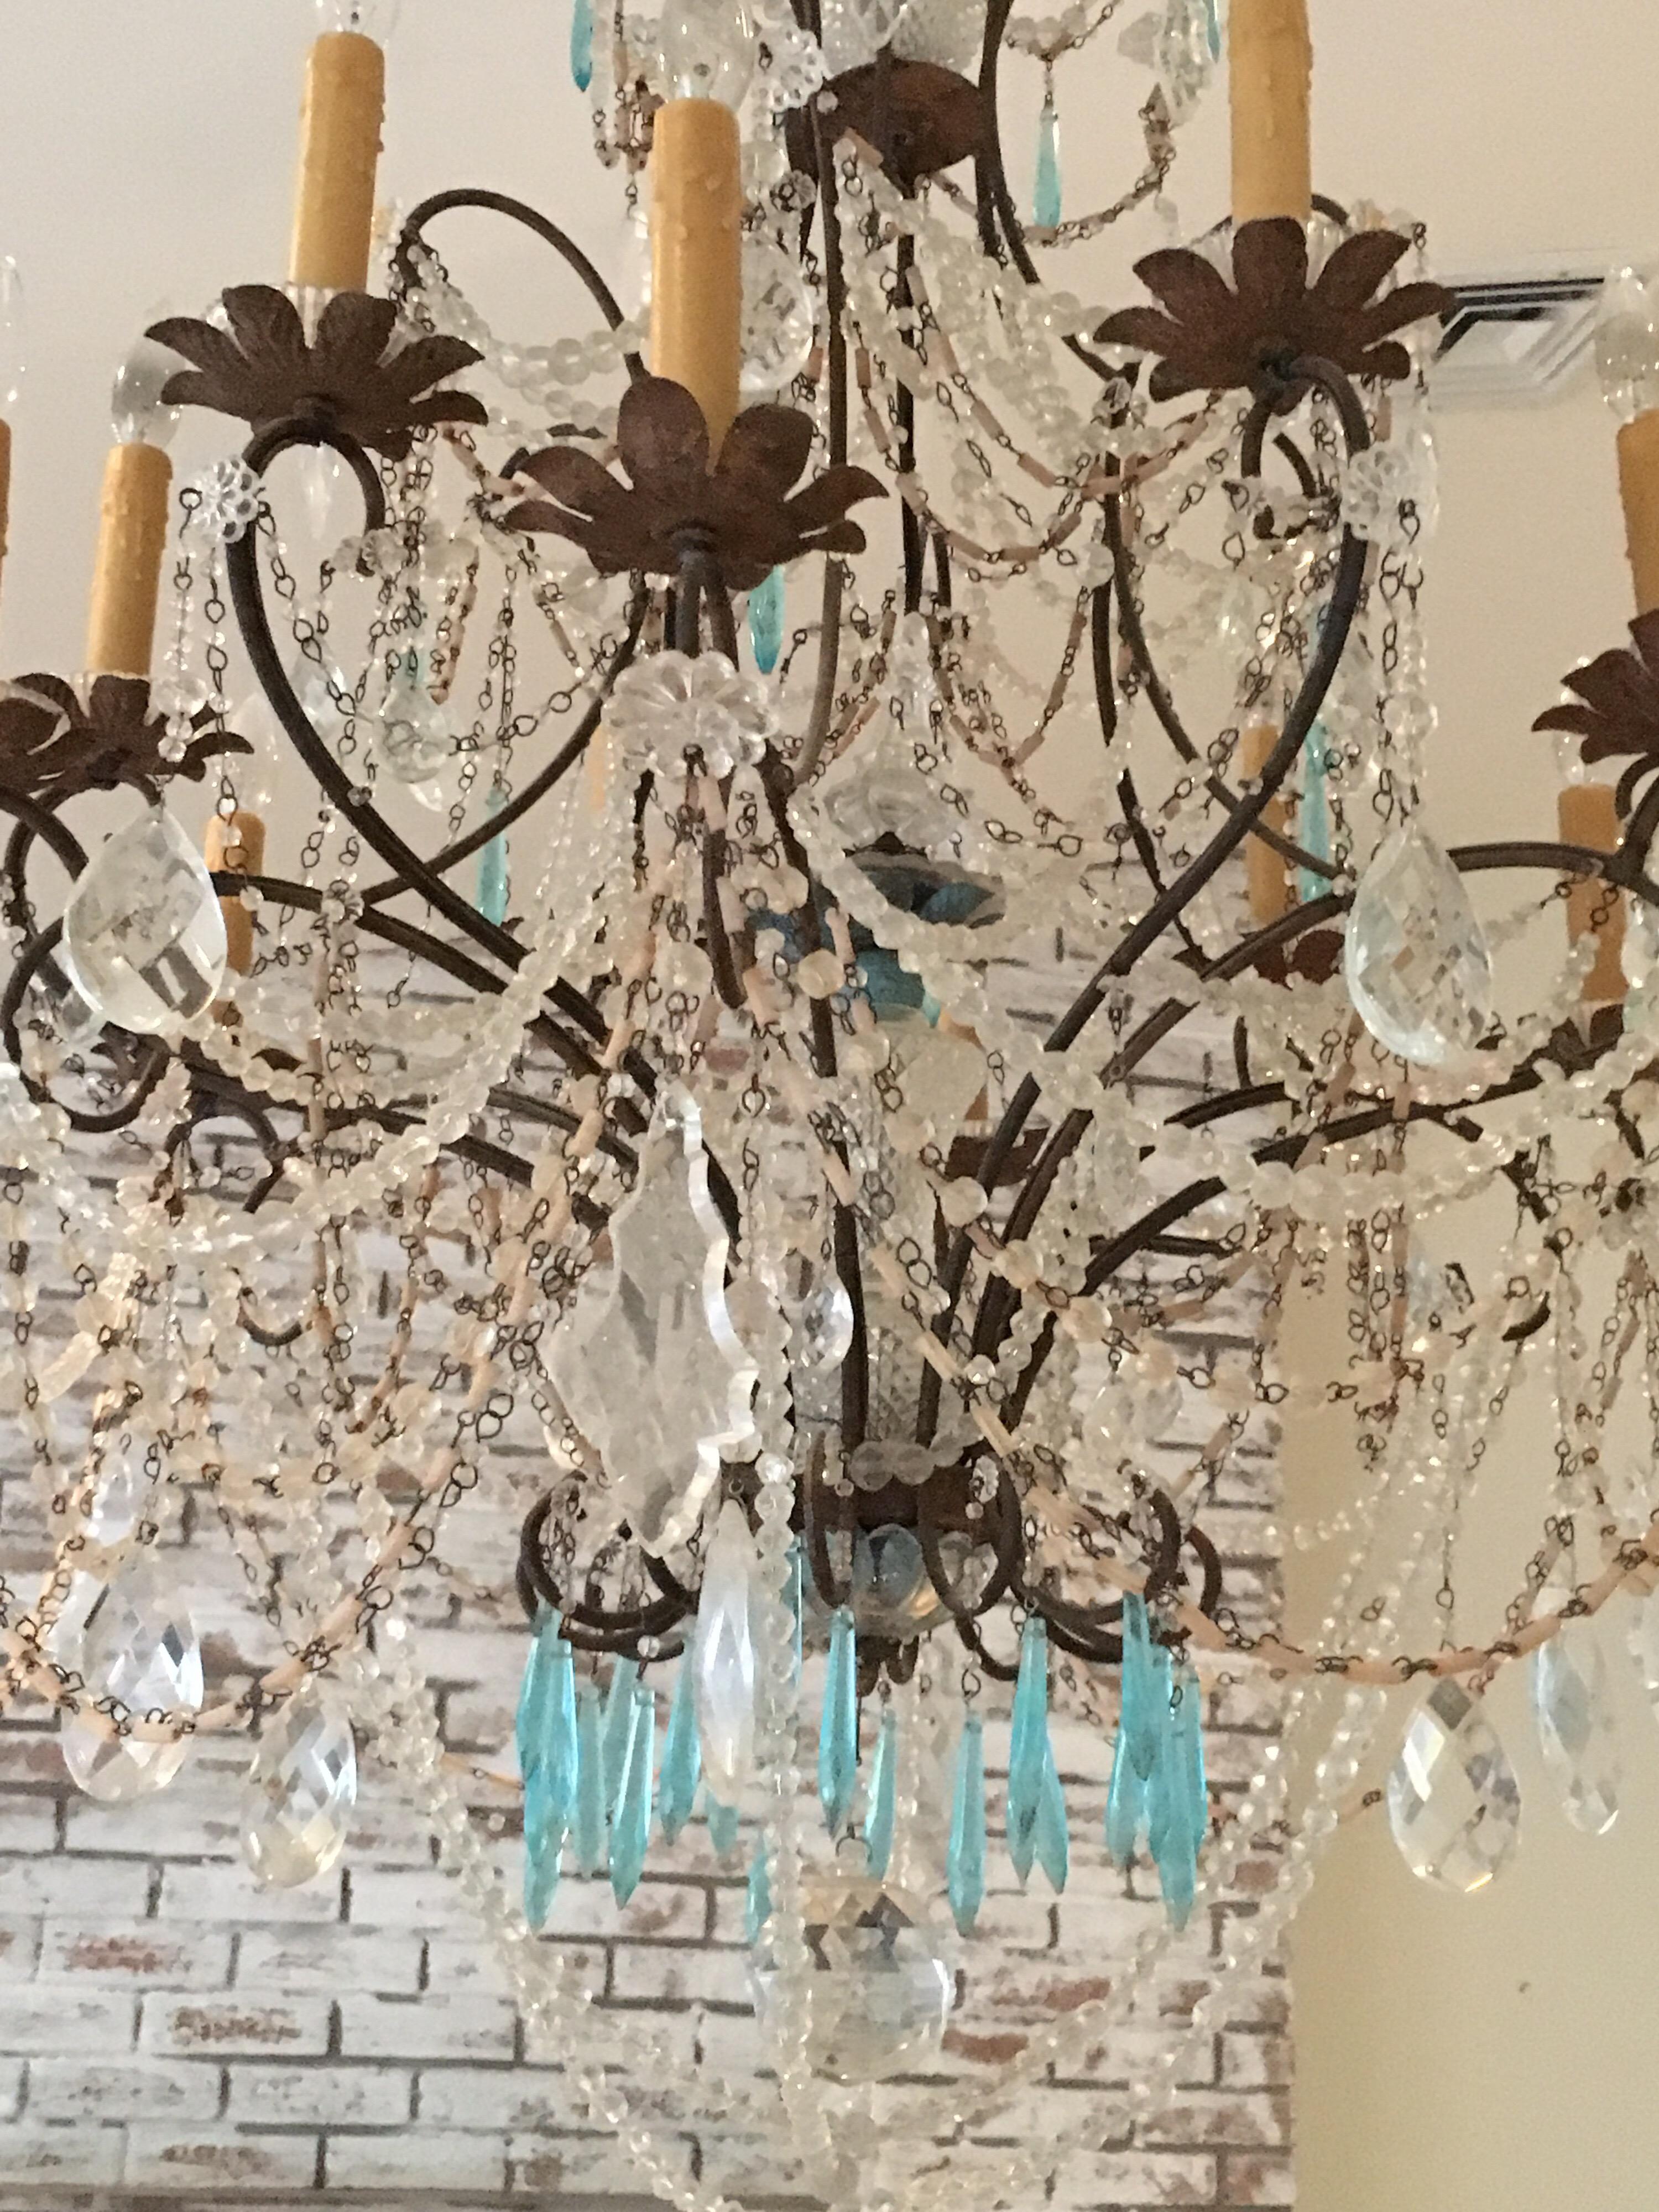 Early 19th century French crystal chandelier. Draped with large size crystal bead roping, heavy pear shaped faceted drops, aqua faceted drops, large faceted round crystal. Iron structure with flower petal 12 arm candle lights. electrified.
45